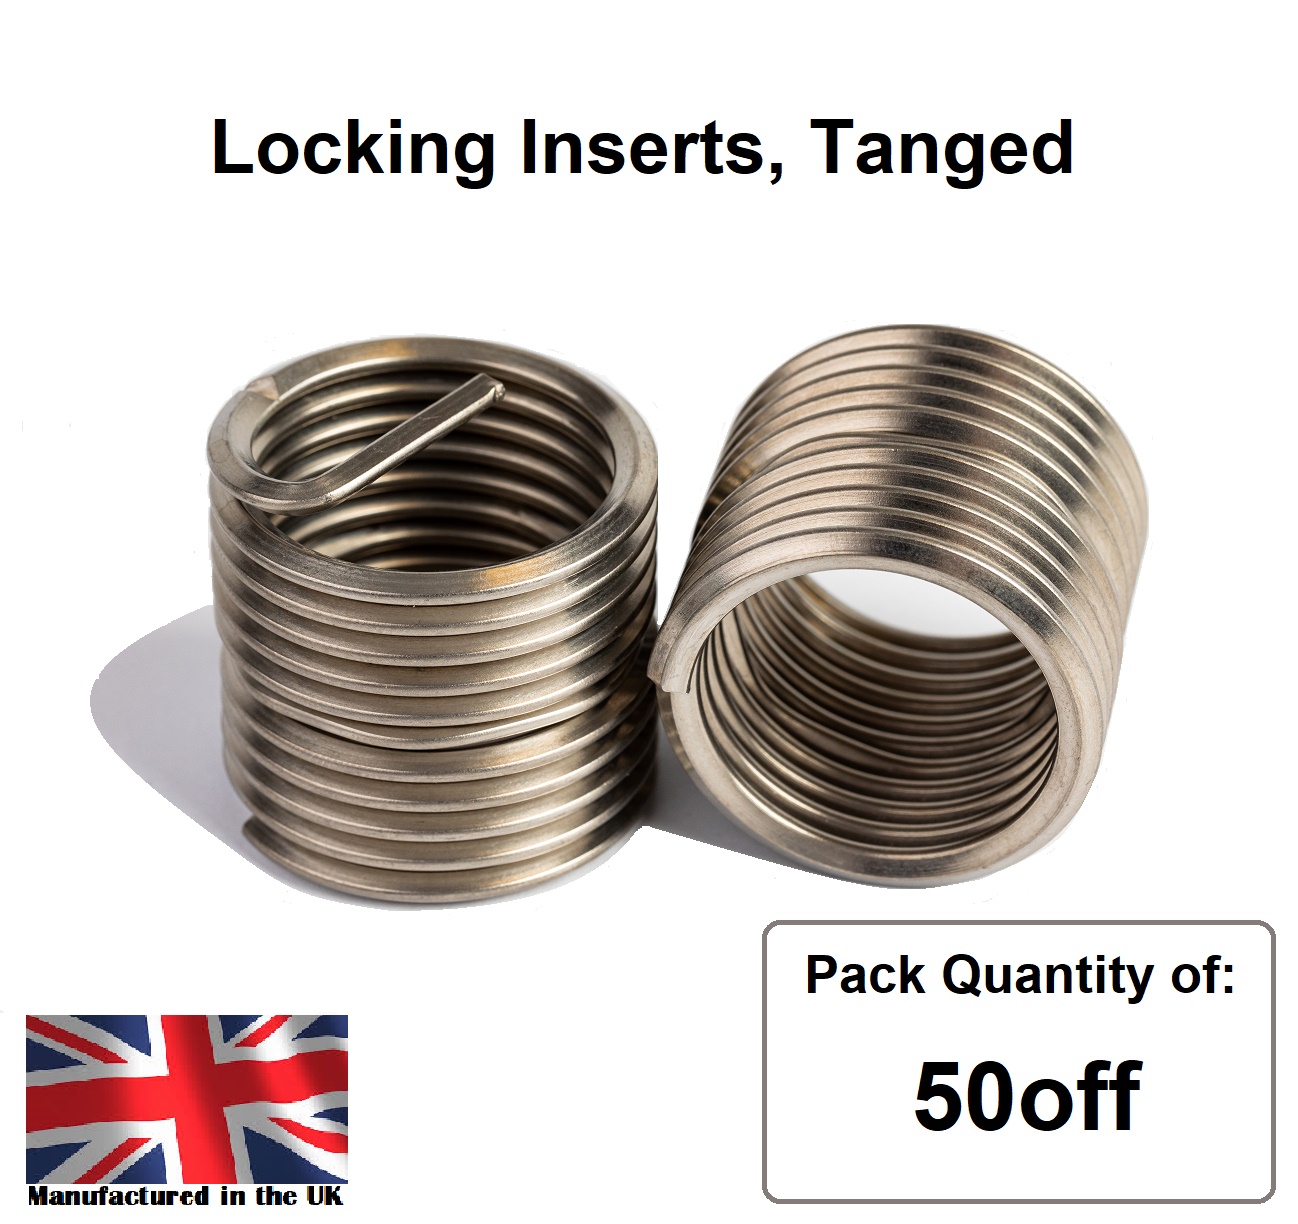 6-32 x 2.5D UNC, LOCKING, Tanged, Wire Thread Repair Insert, 304/A2 Stainless (Pack 50)